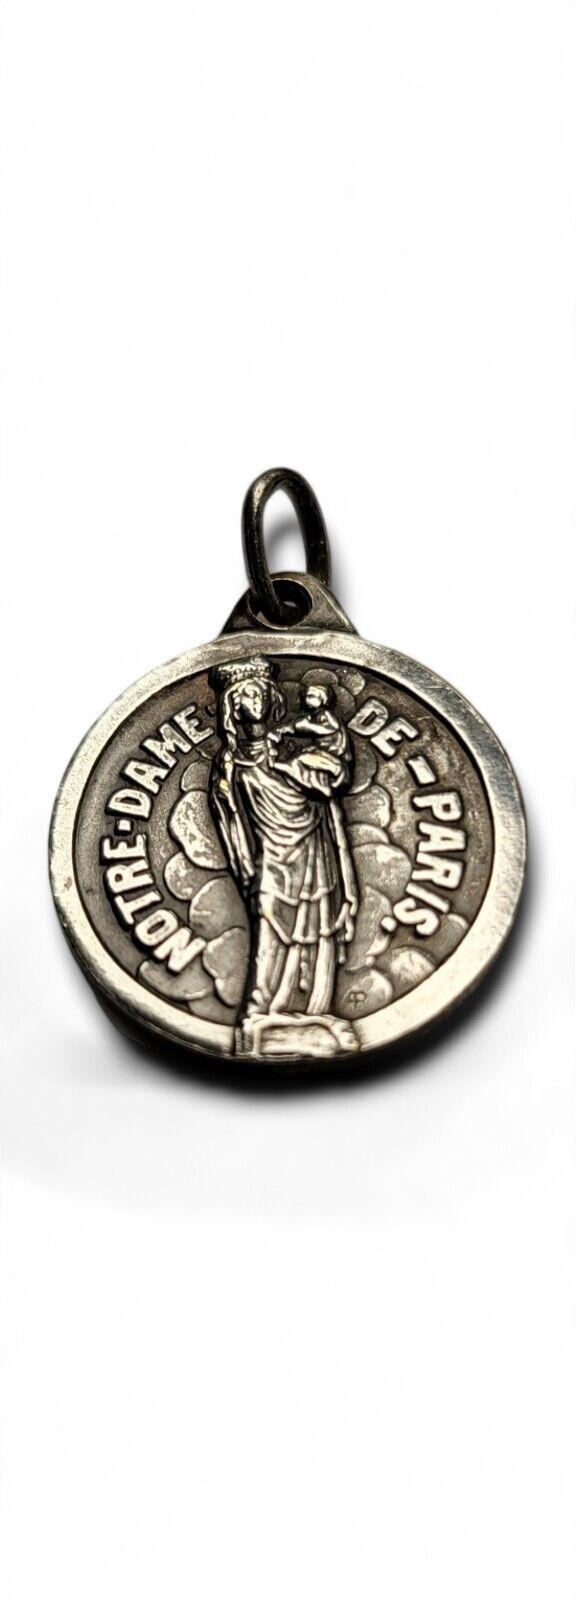 Vintage MARY OUR LADY OF PARIS Medal NOTRE DAME CATHEDRAL Religious Catholic AP